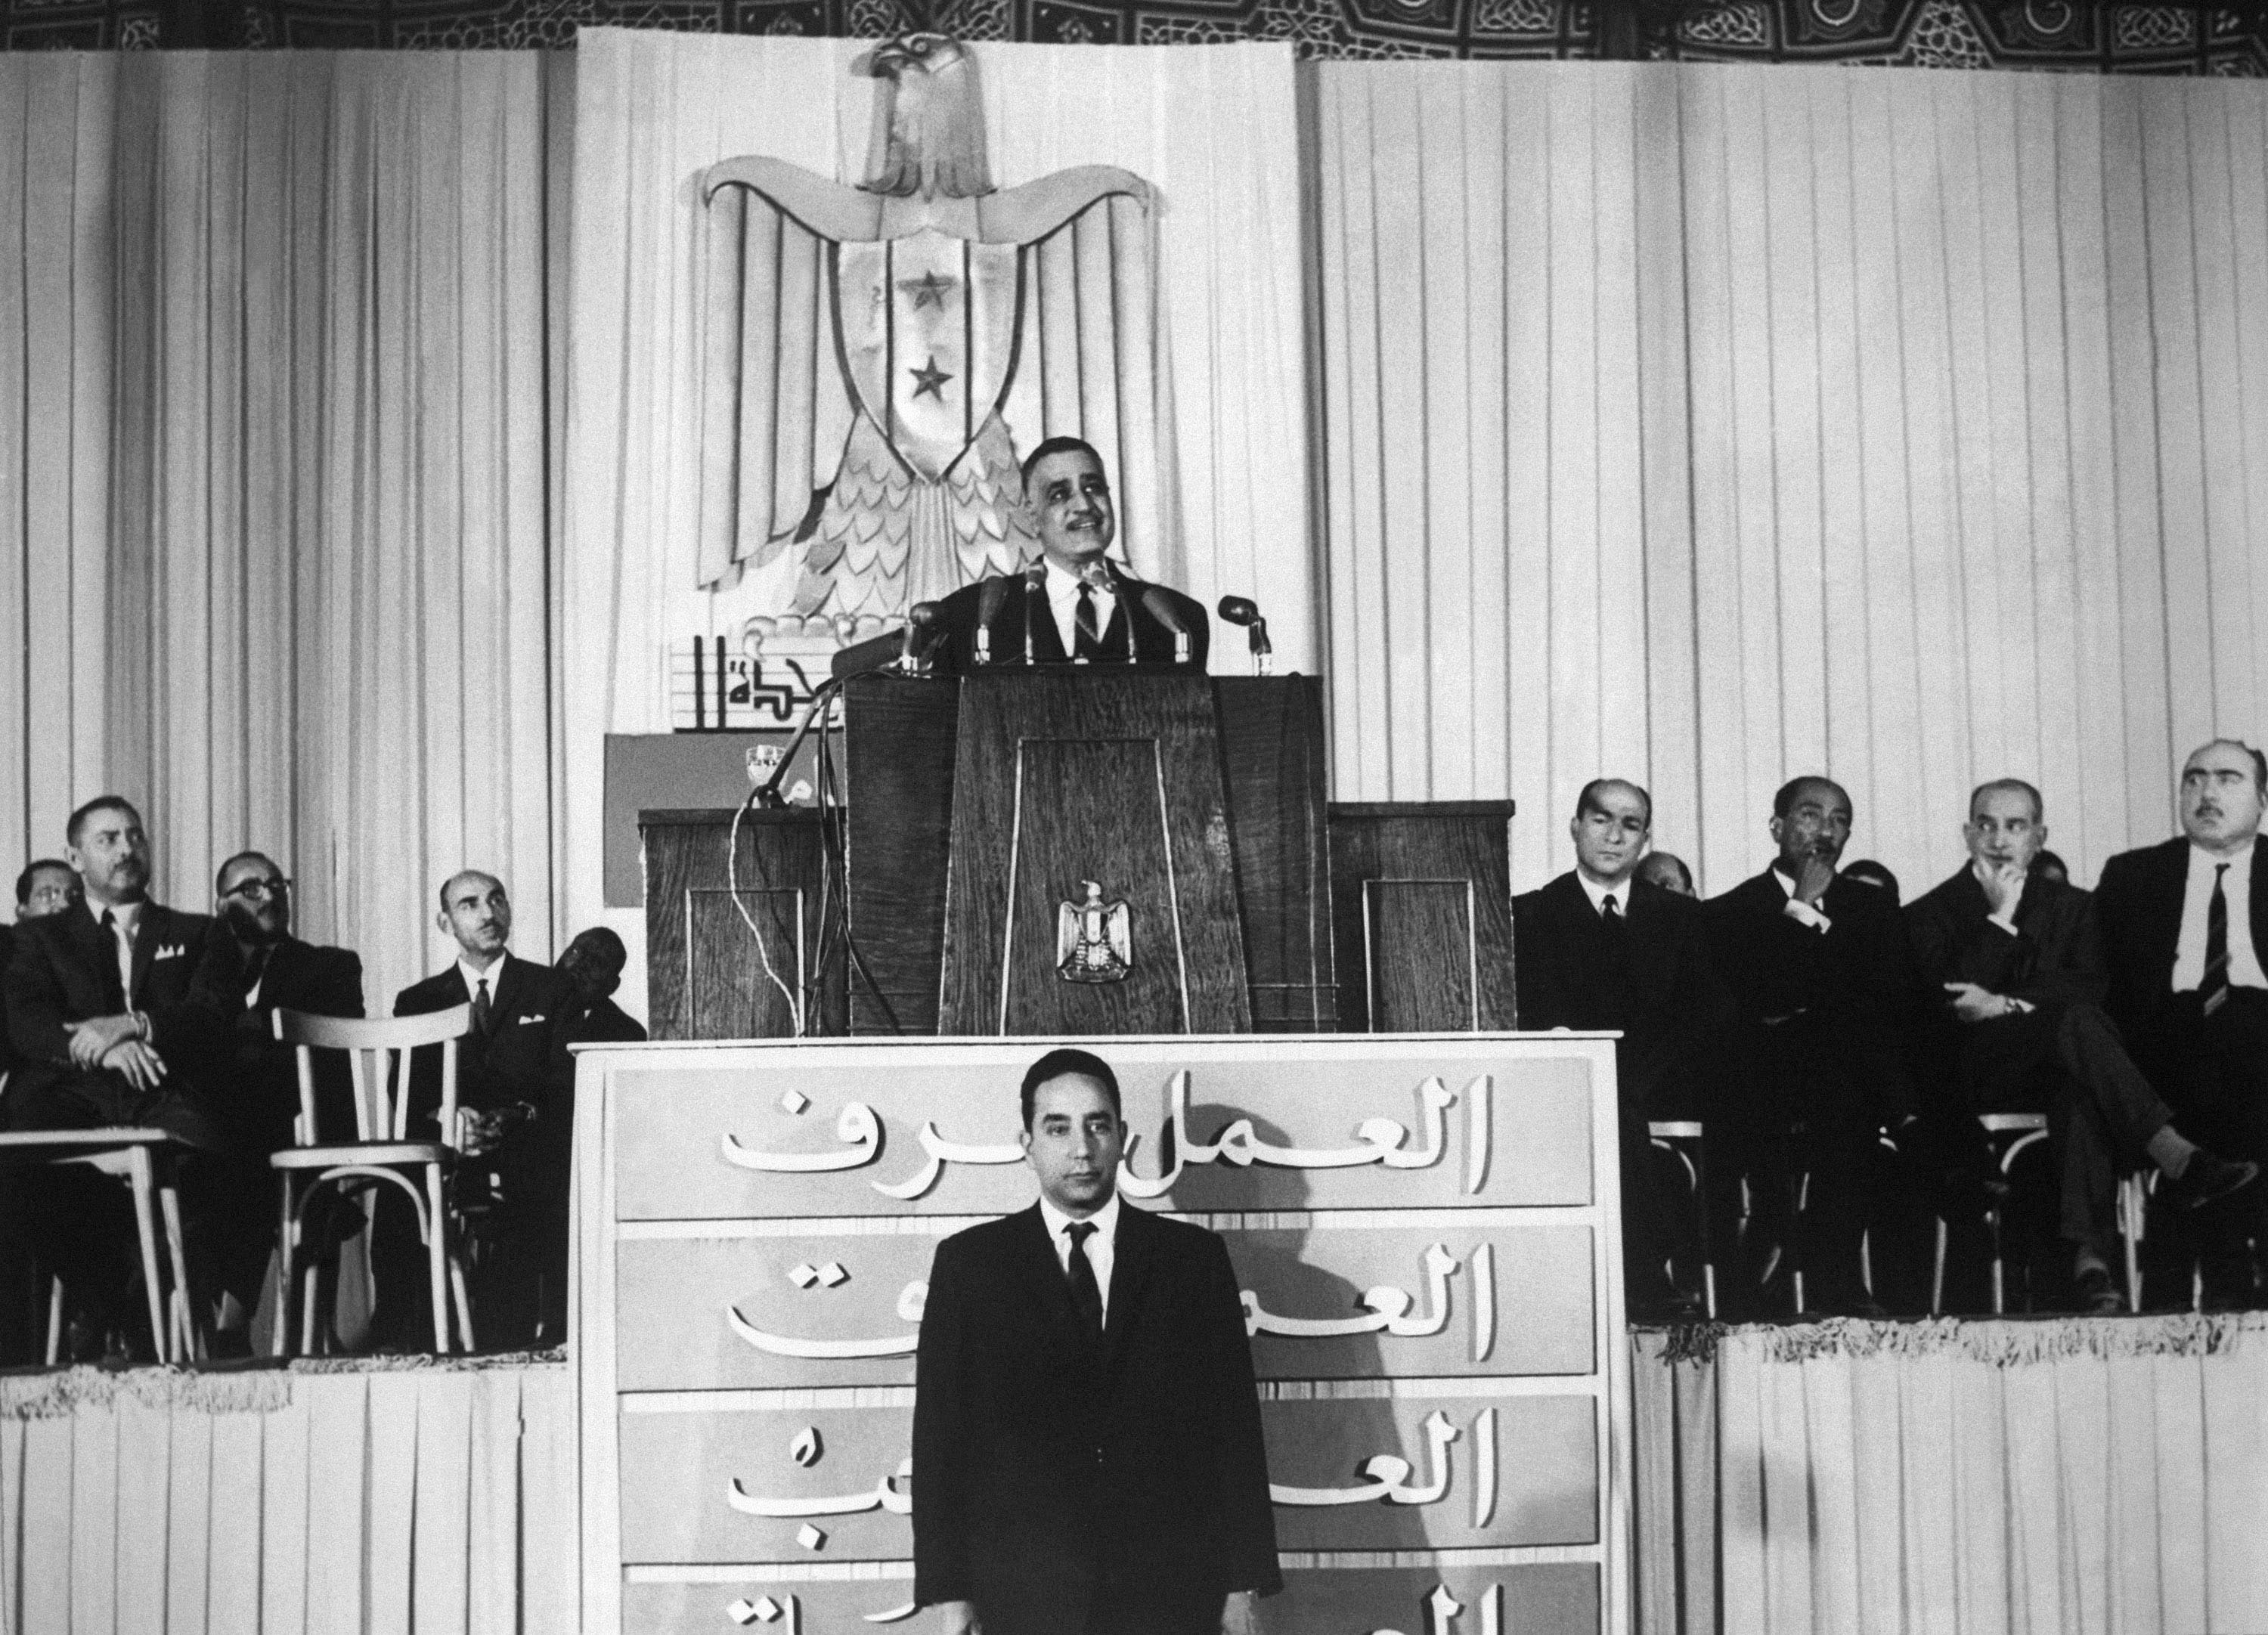 Egypt's President Gamal Abdel Nasser seen making a speech in 1968. His sucessor, Anwar Sadat can be seen second from right (AP)